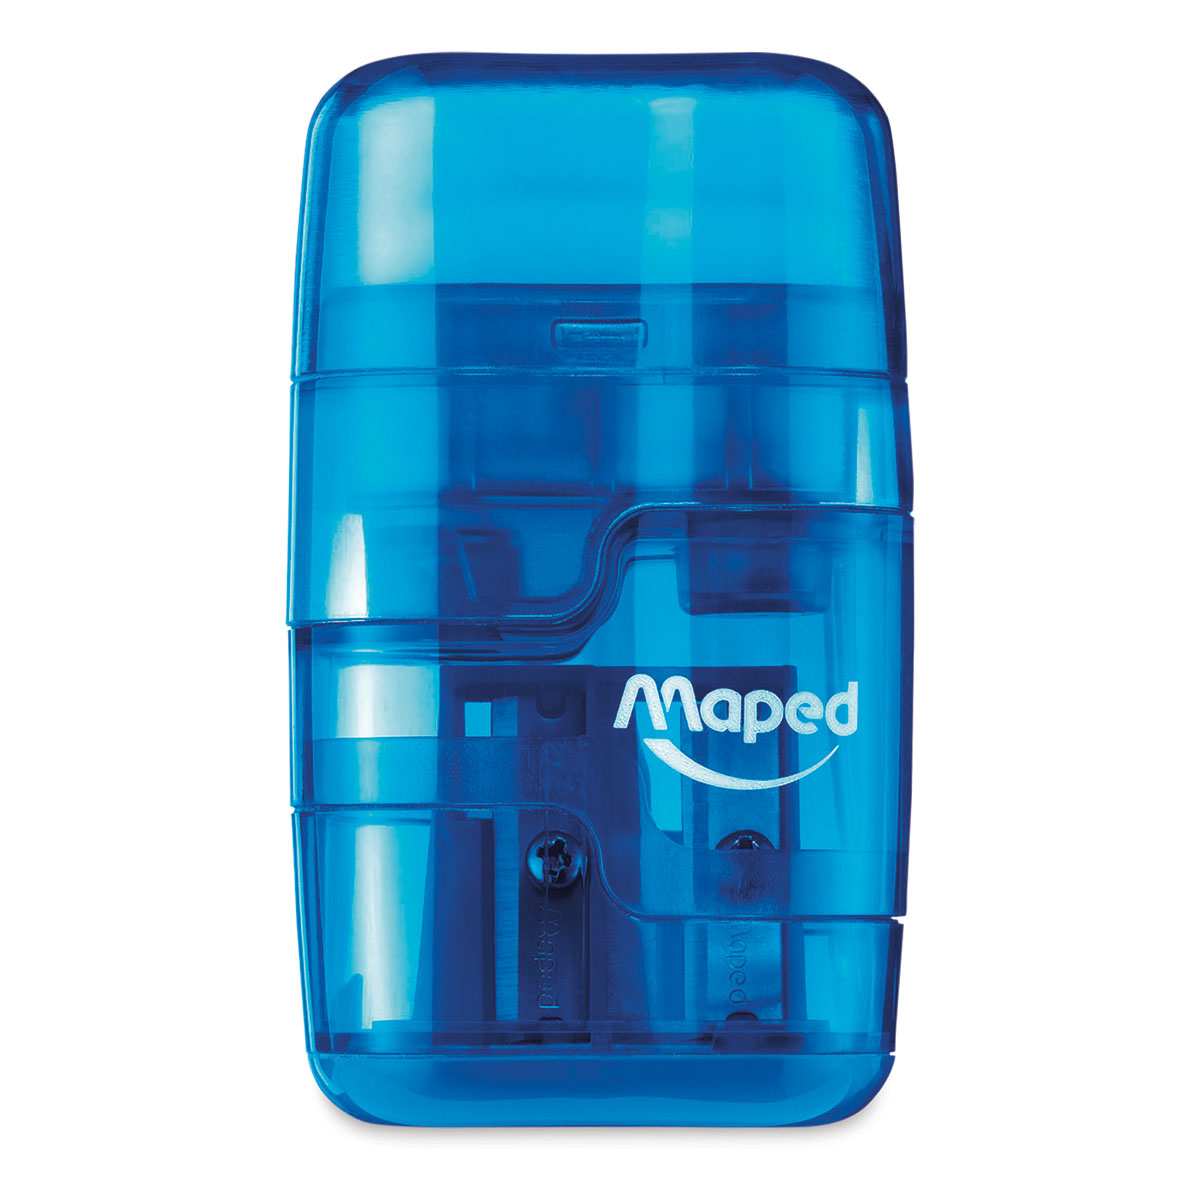 Maped Connect DUO 2 Hole Sharpener / Eraser Combo, Assorted